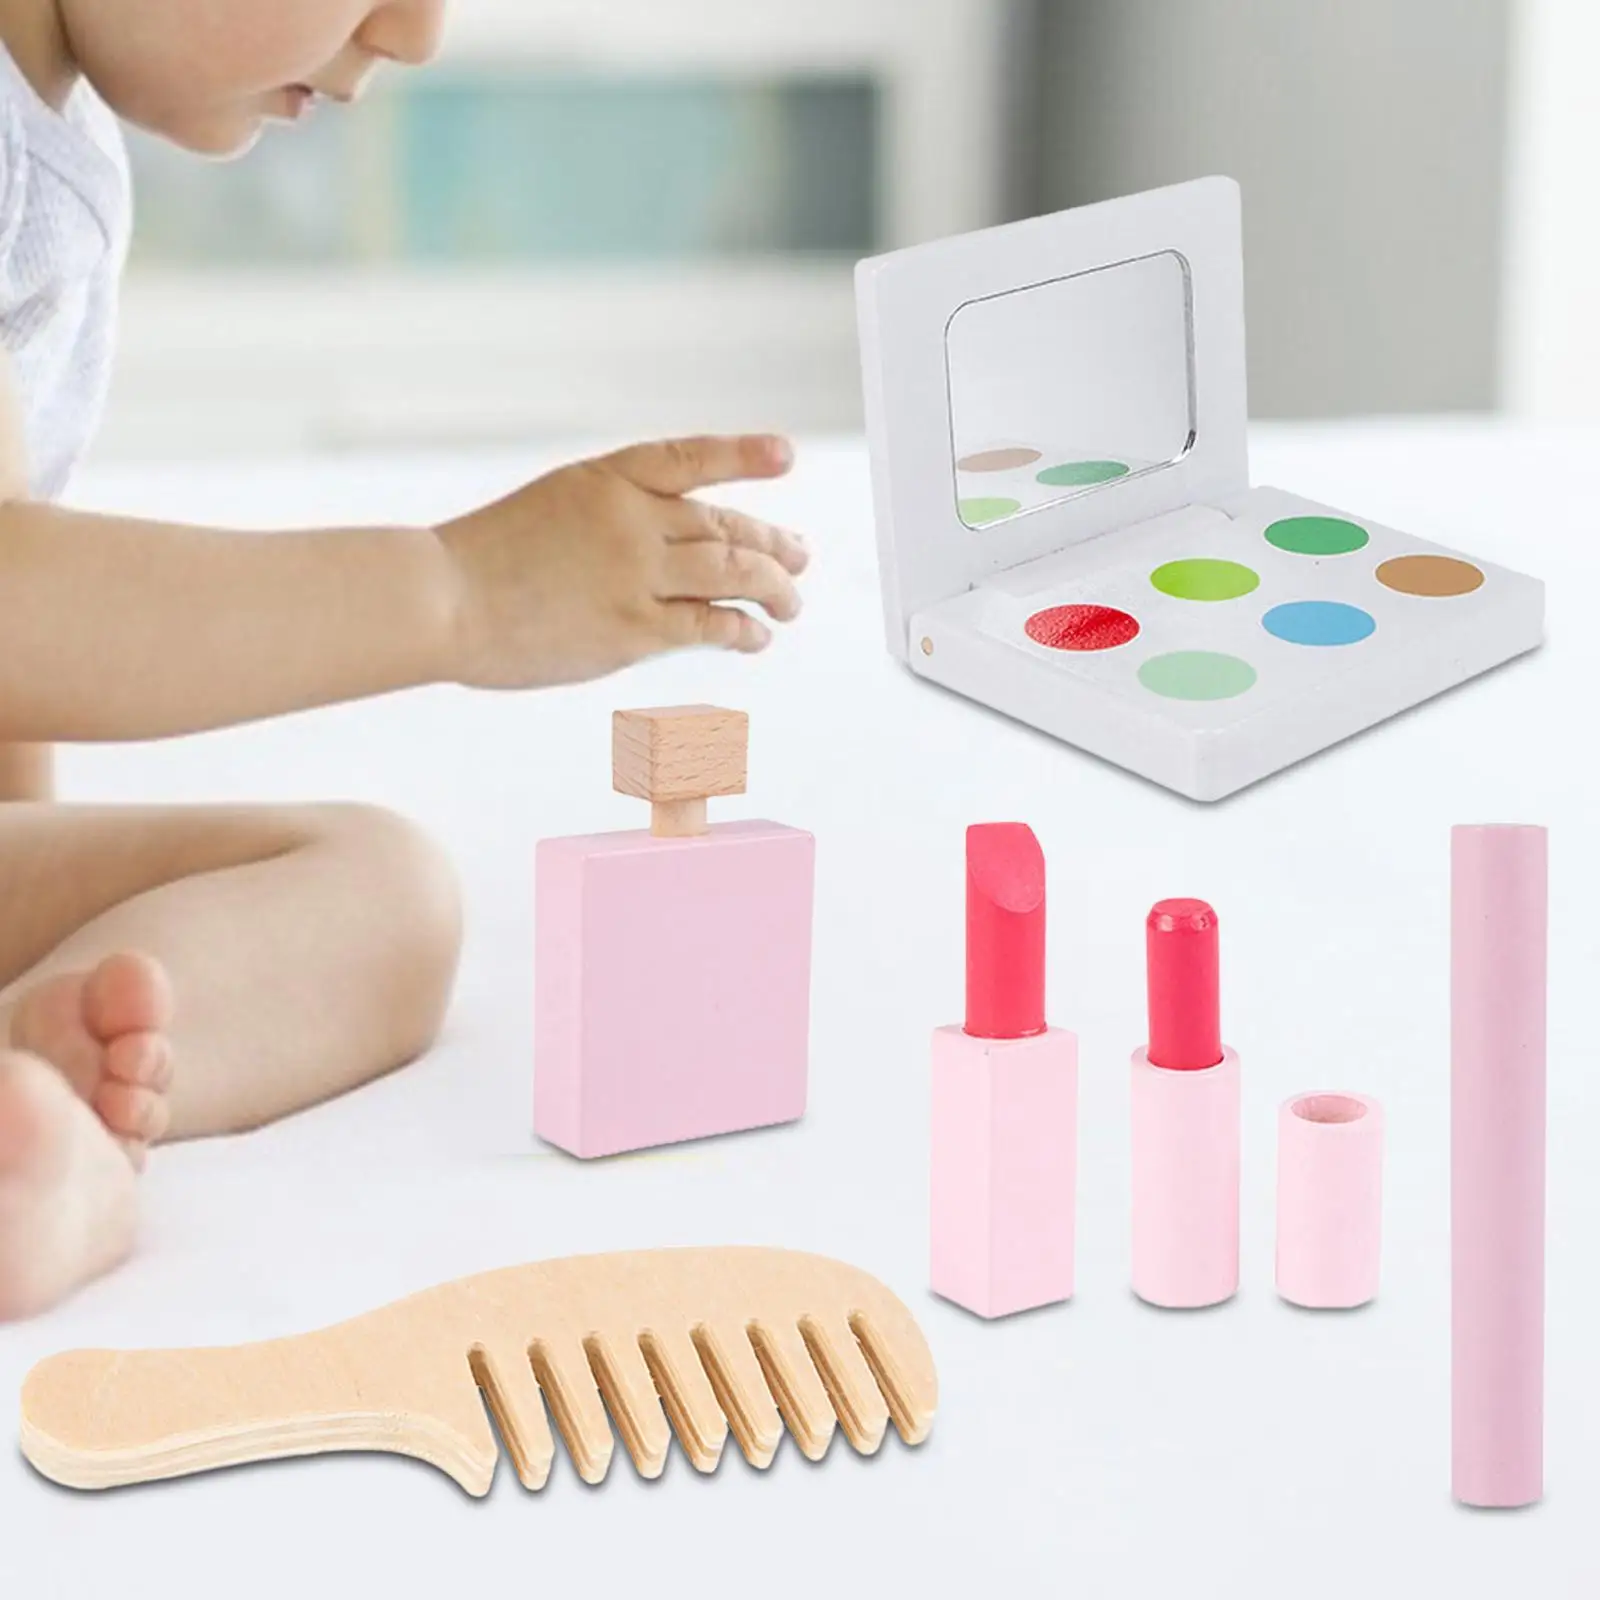 6Pcs Wood Kids Makeup Set Wooden Beauty Salon Learning Activities Pretend Play for Birthday Gift Girl Ages 3 4 5 6 Years Old